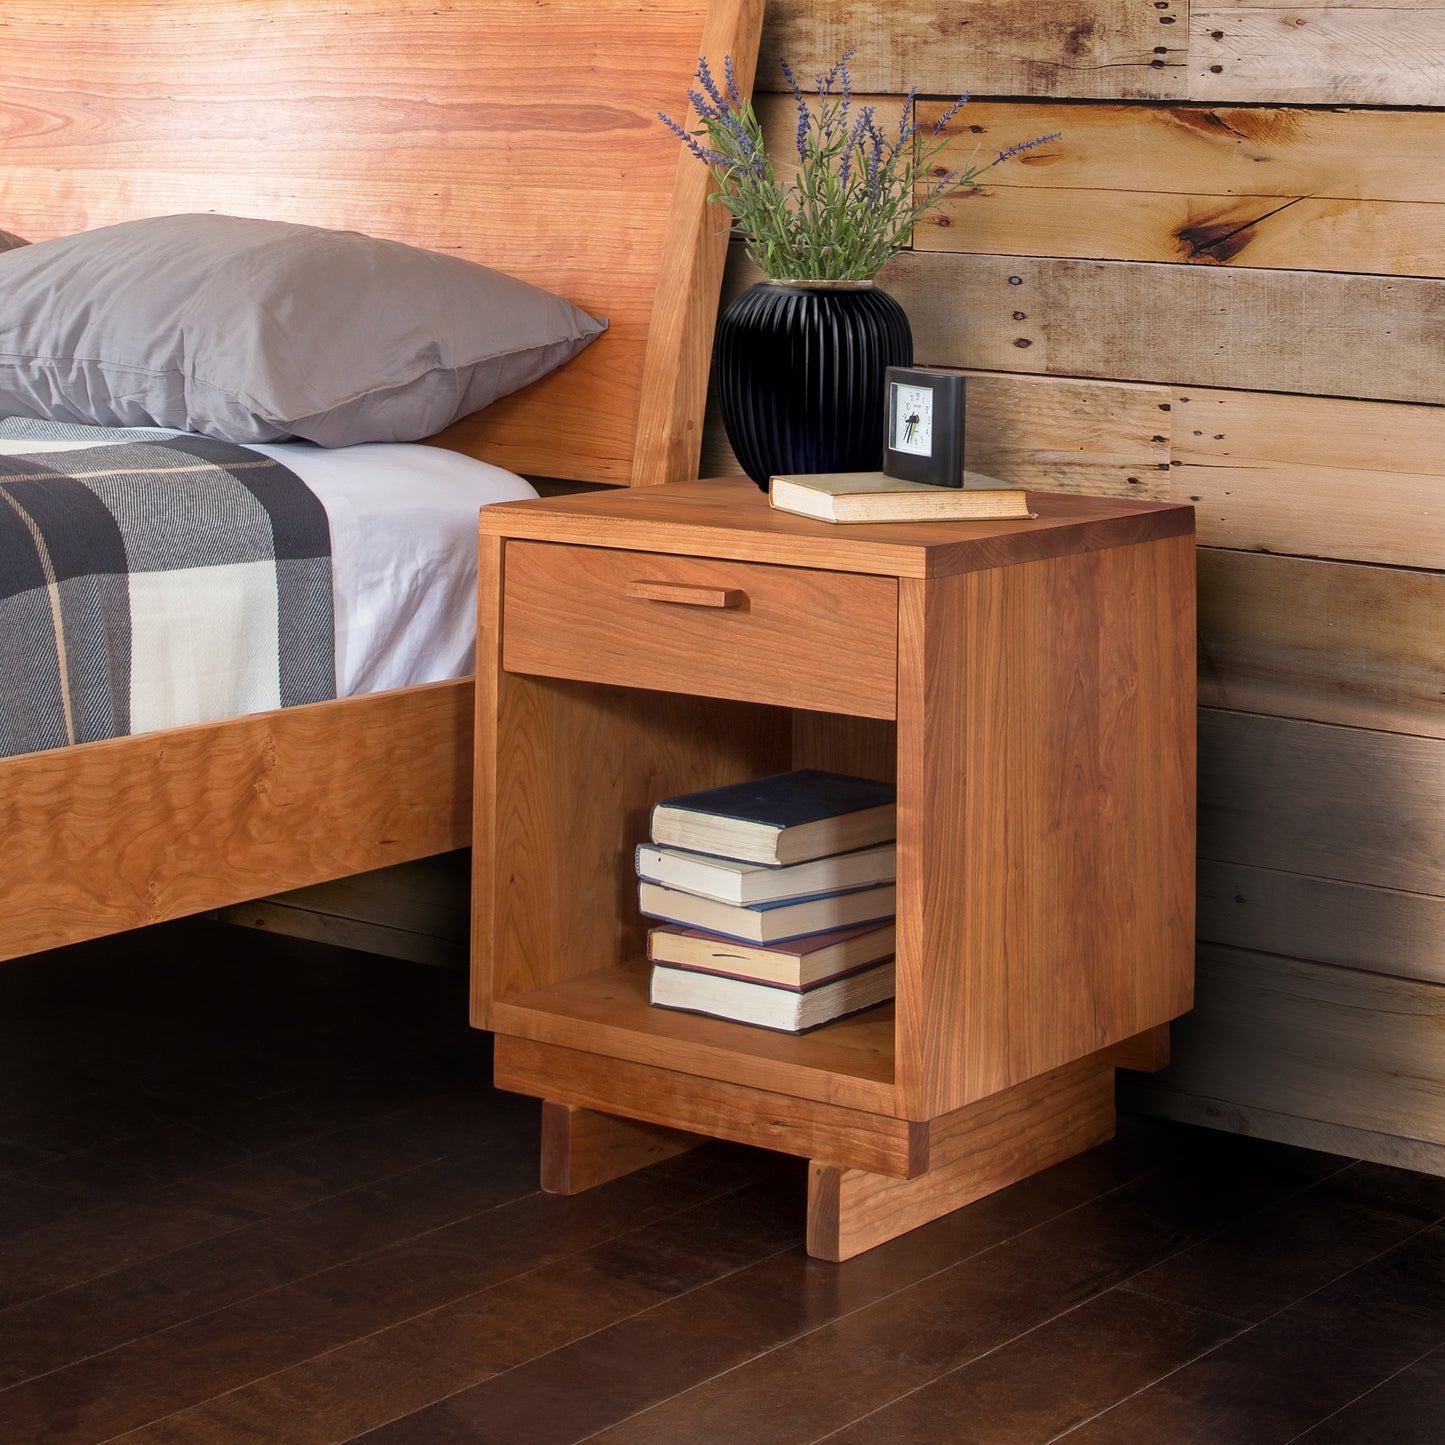 A Vermont Furniture Designs Loft 1-Drawer Enclosed Shelf Nightstand with an open drawer and a lower shelf holding a stack of books, located next to a bed with plaid bedding. A black vase with lavender flowers and a small